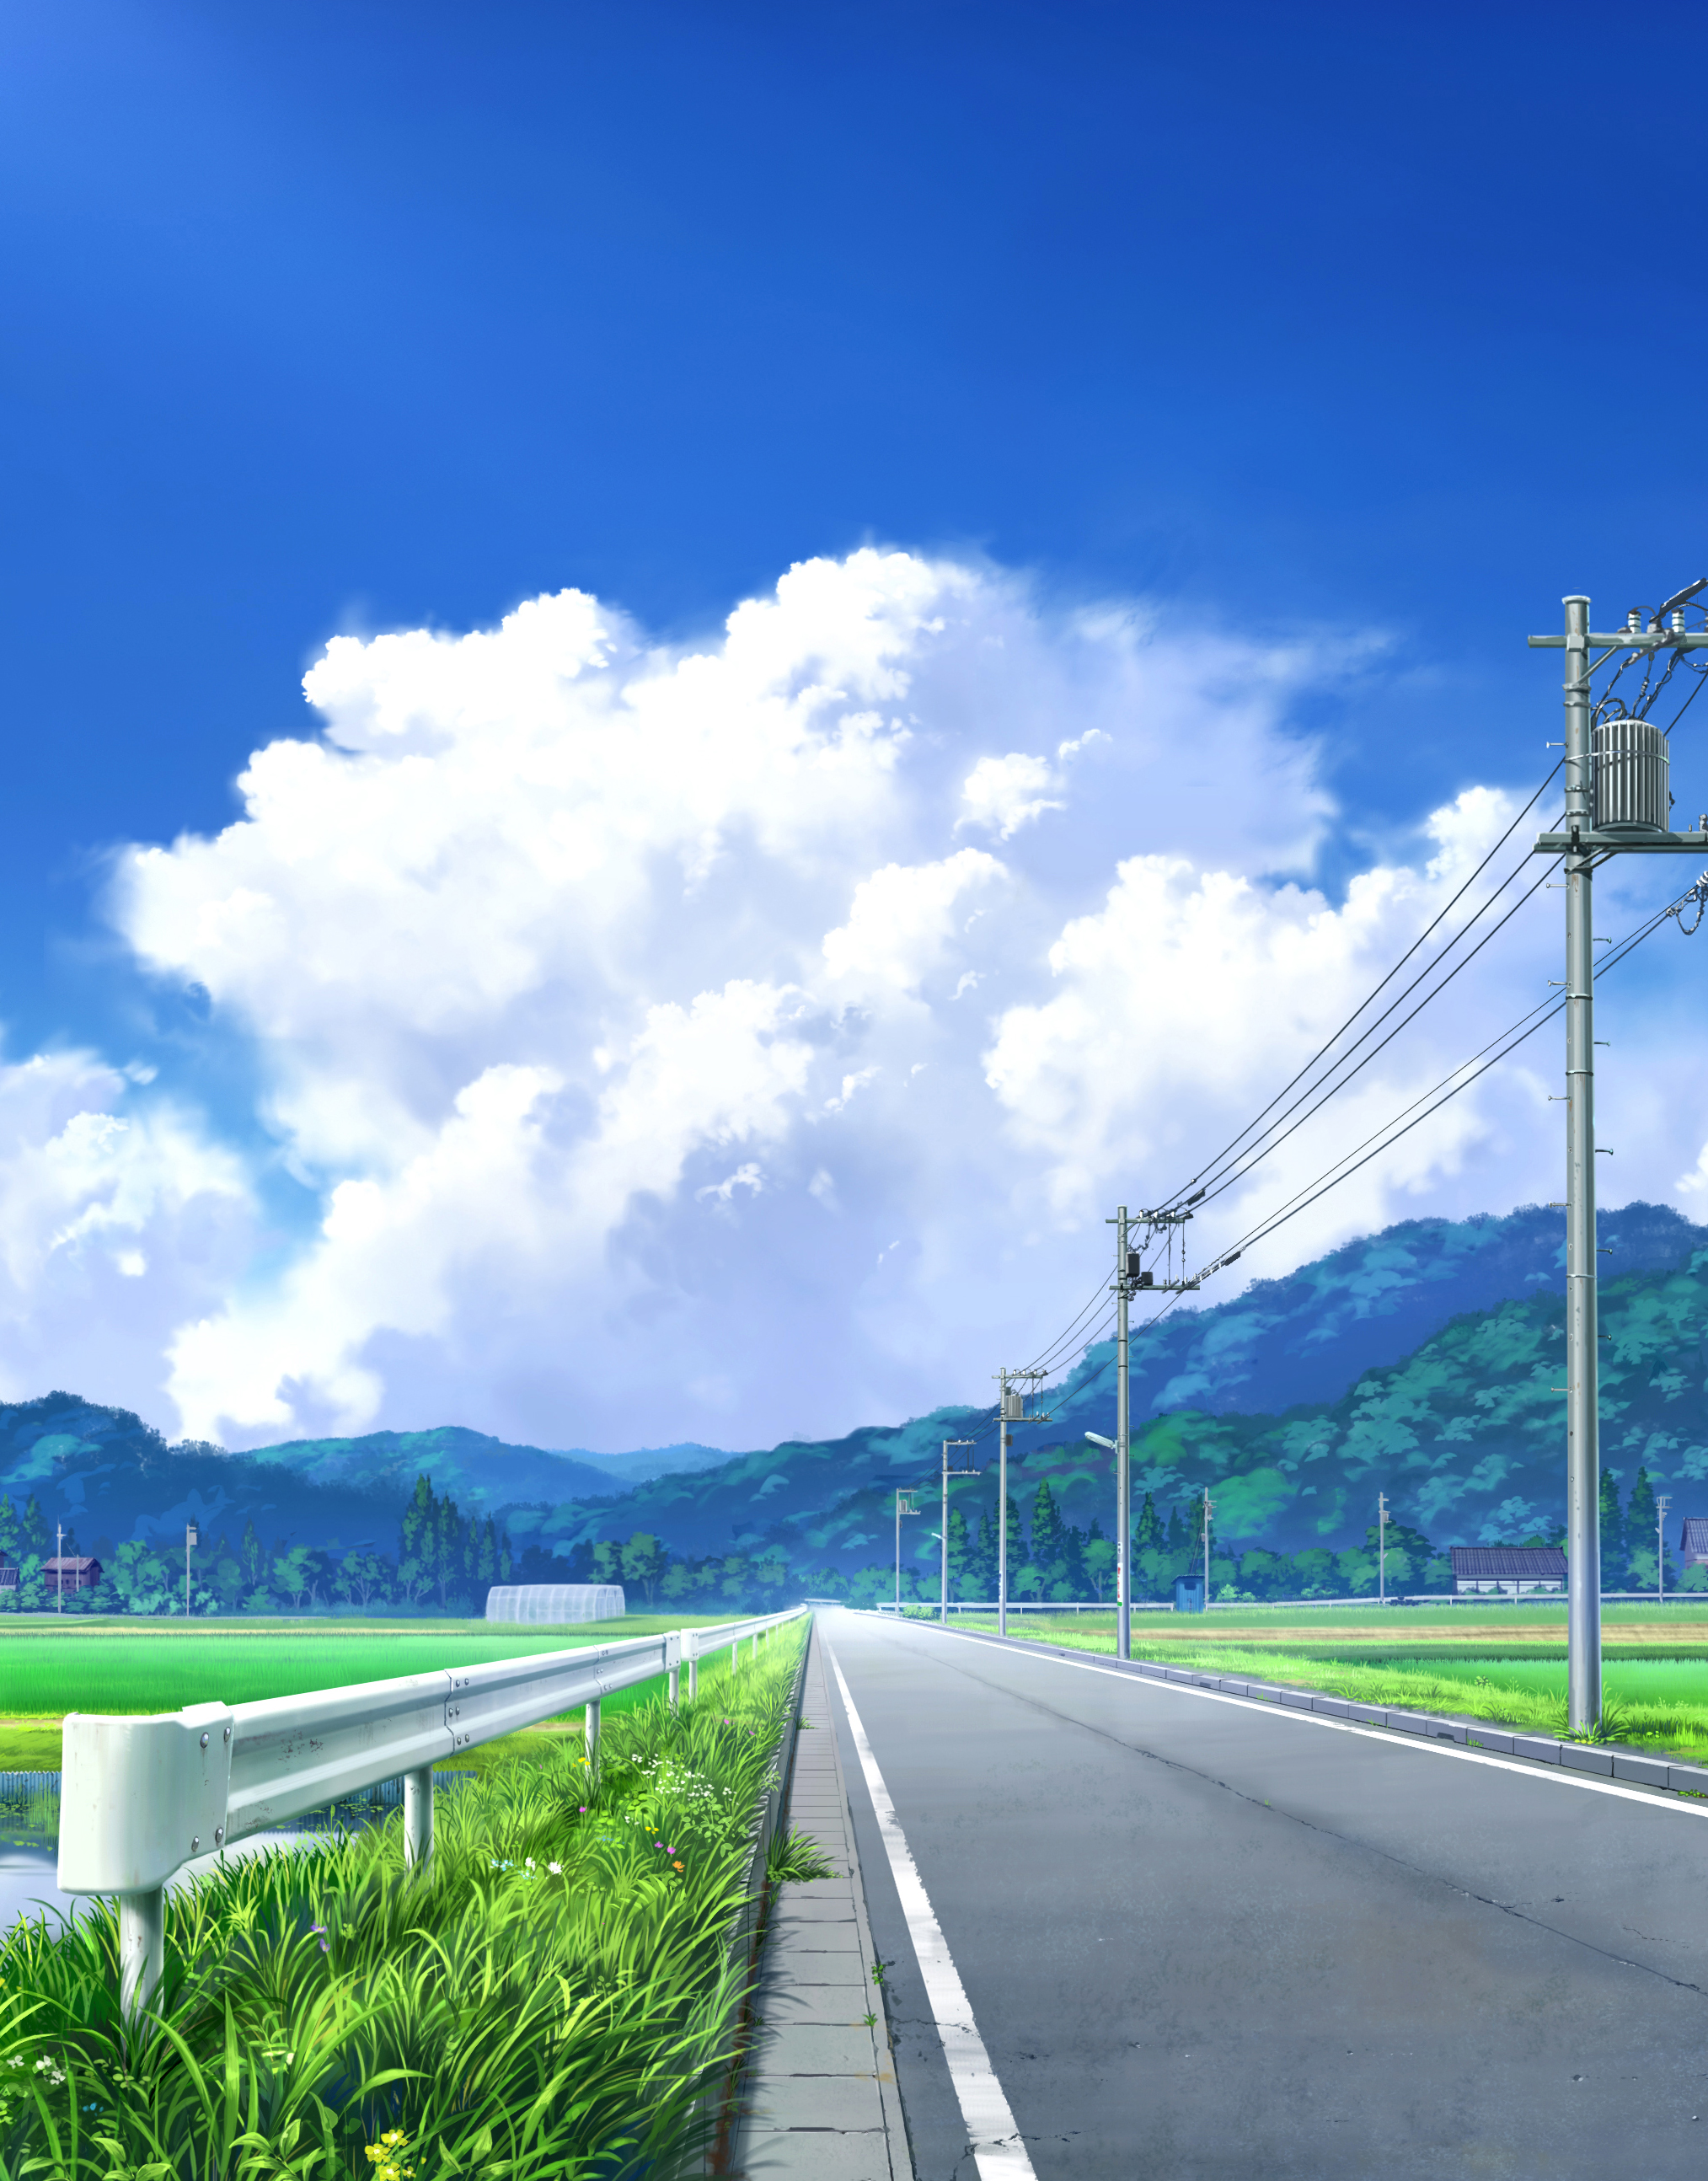 Pei Sumurai Power Lines Portrait Display Utility Pole Road Grass Clouds Sky Flowers Wires Outdoors T 2027x2588